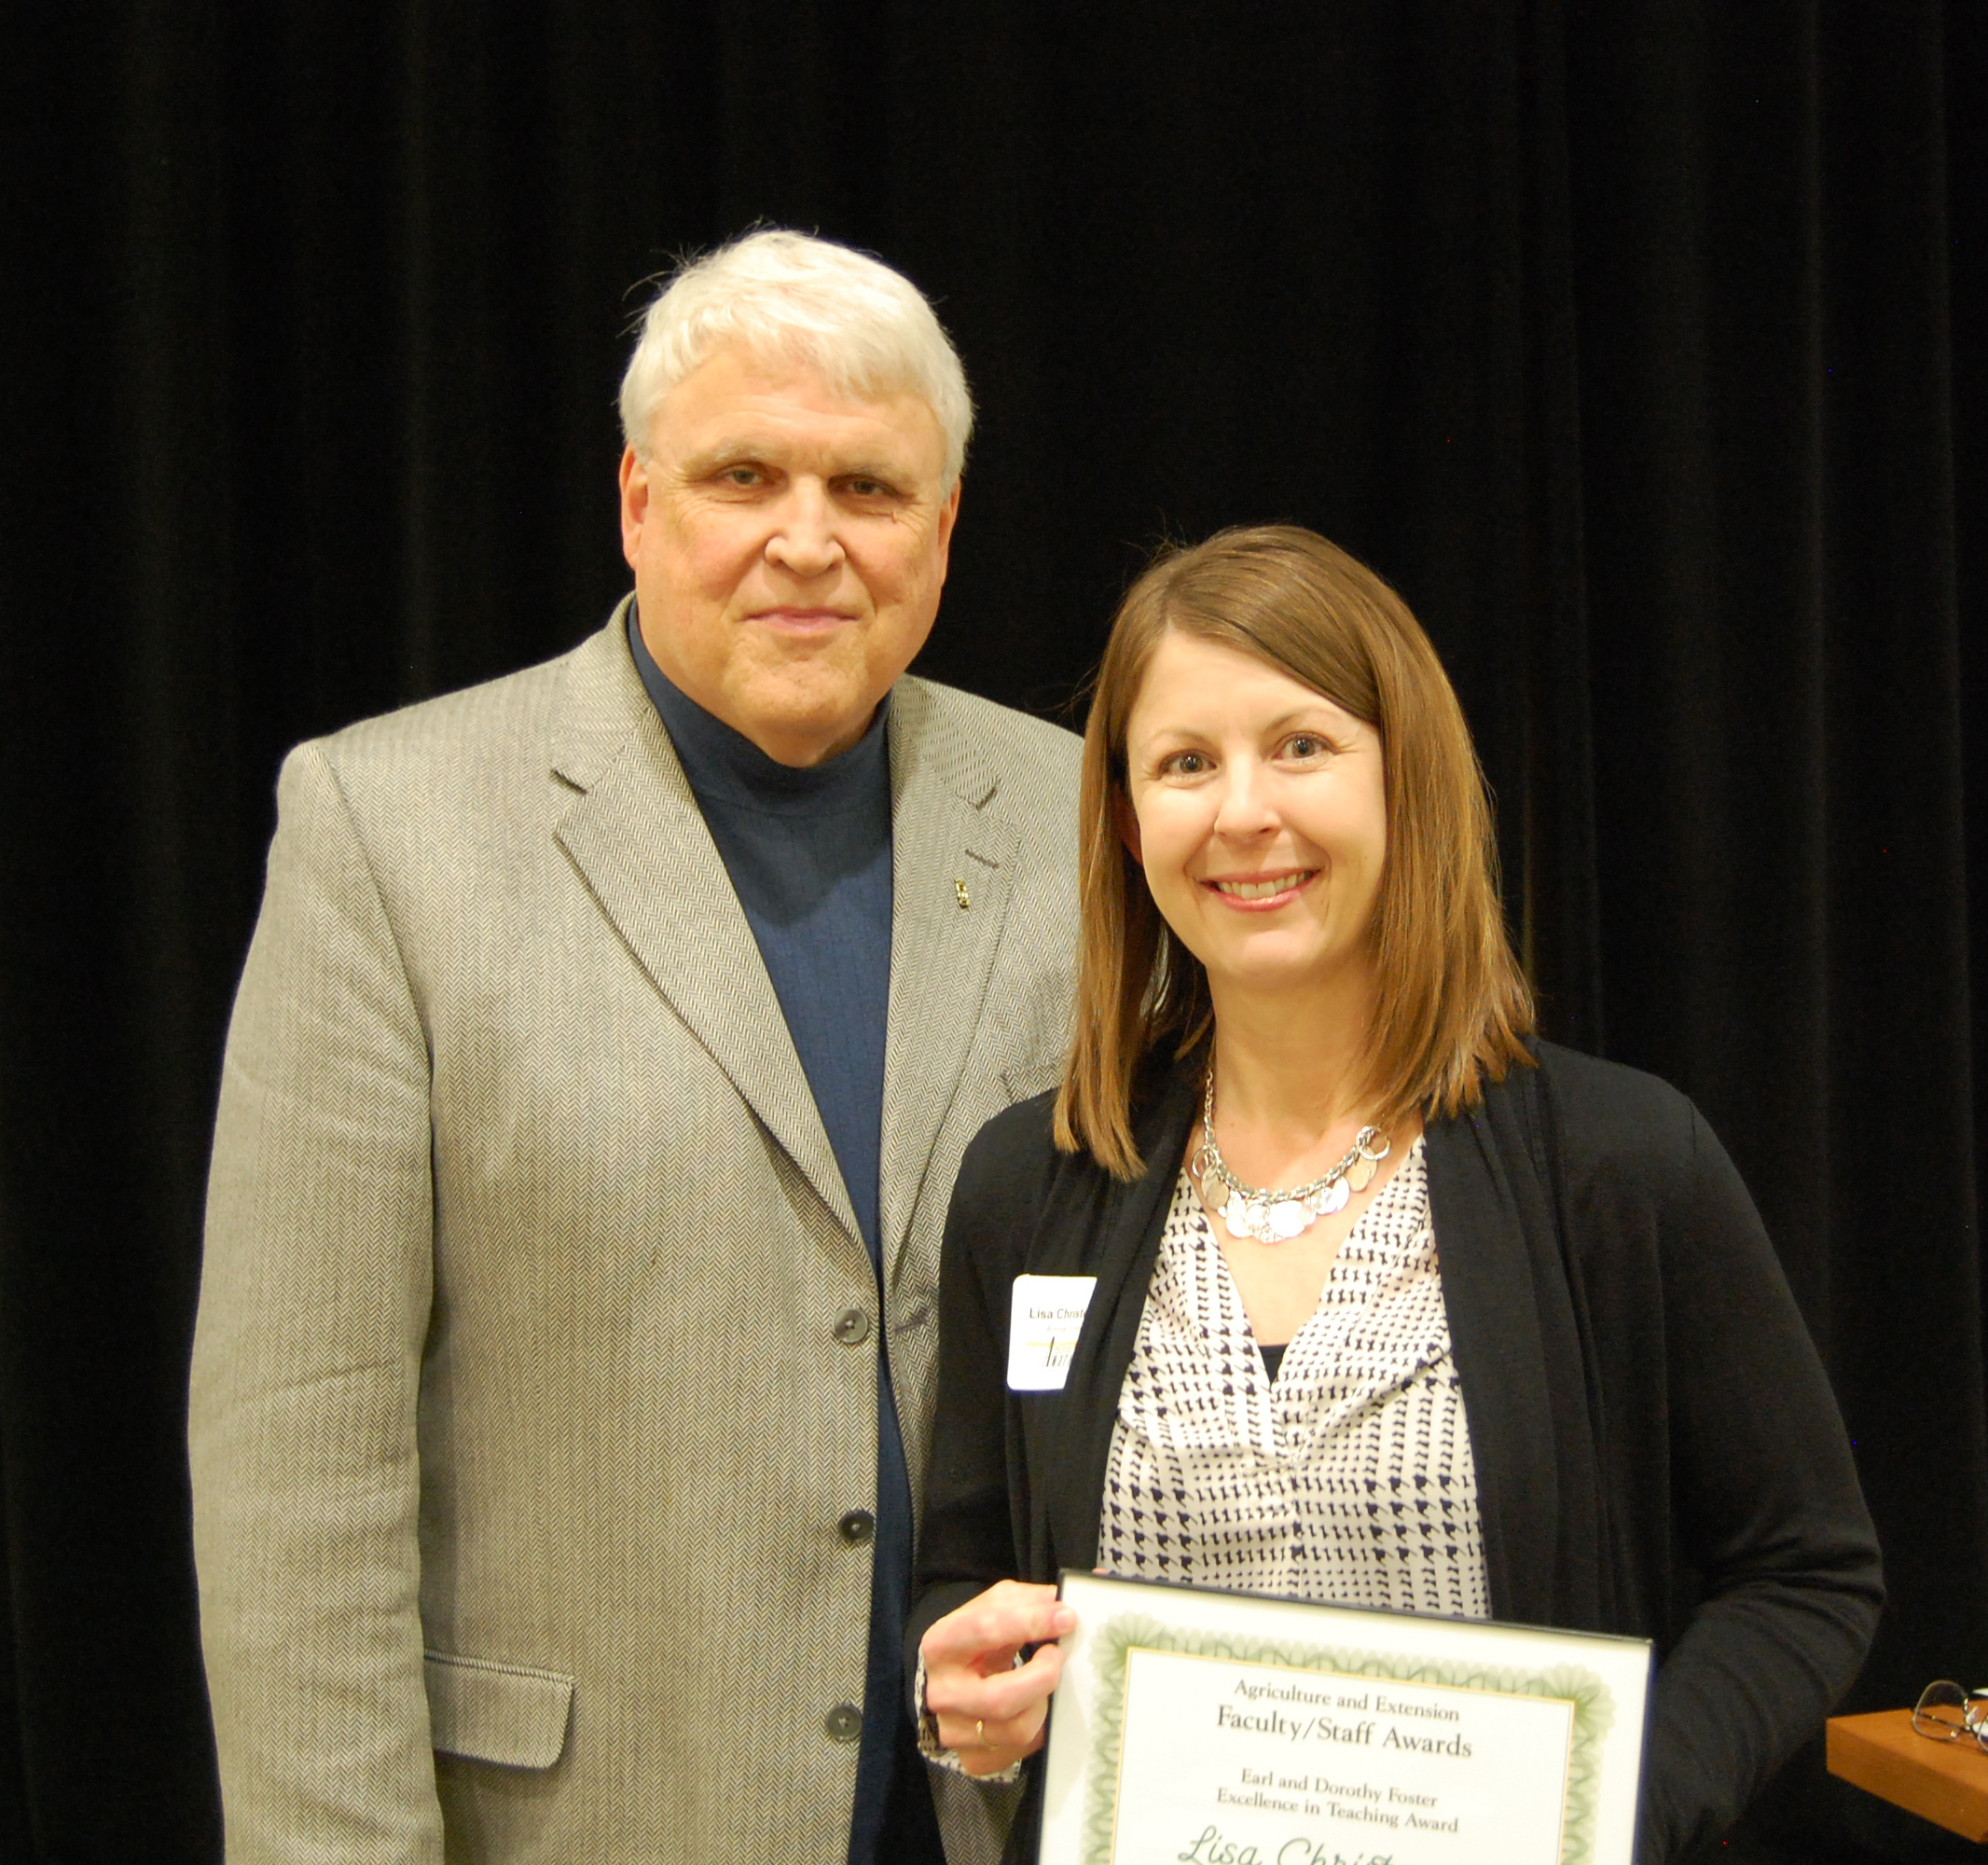 Lisa Christenson, right, receives the Earl and Dorothy Foster Excellence in Teaching Award from David Buchanan, associate dean for academic programs. (NDSU photo)